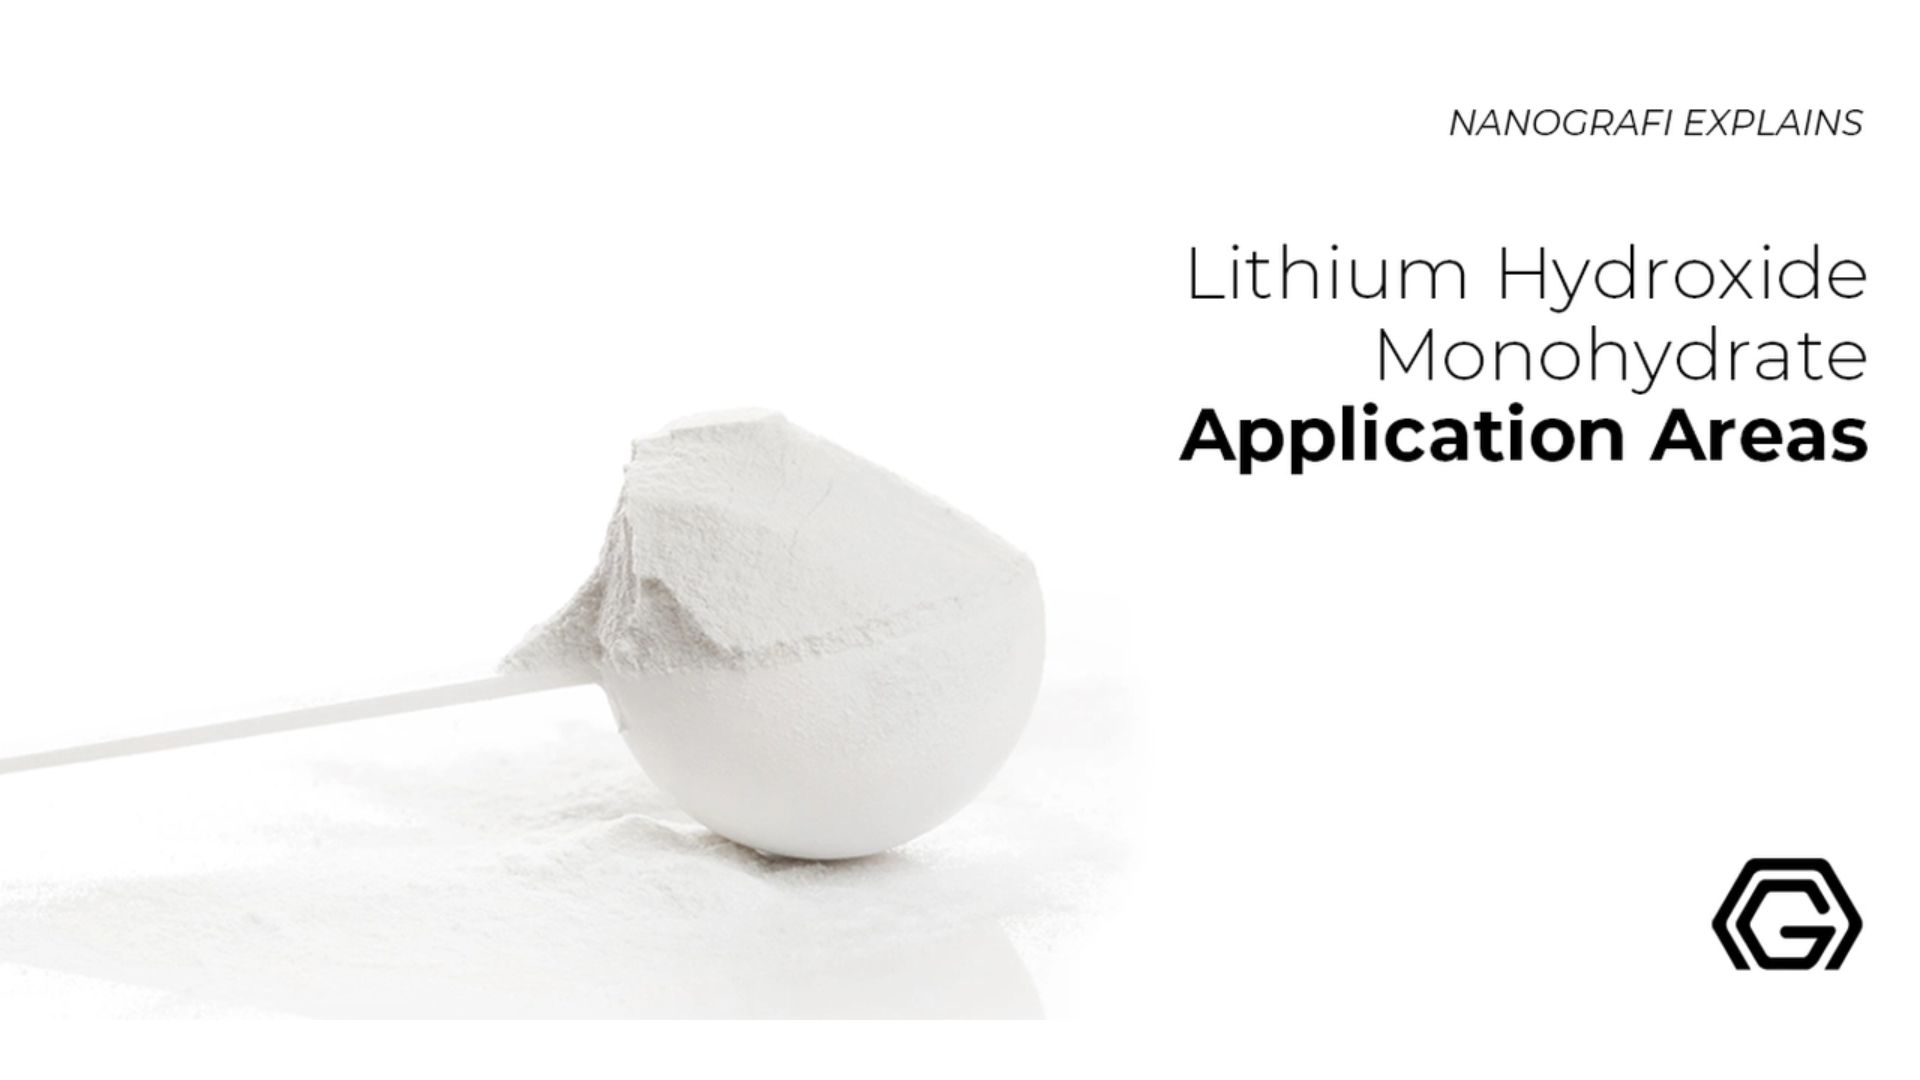 Lithium Hydroxide Monohydrate Application Areas